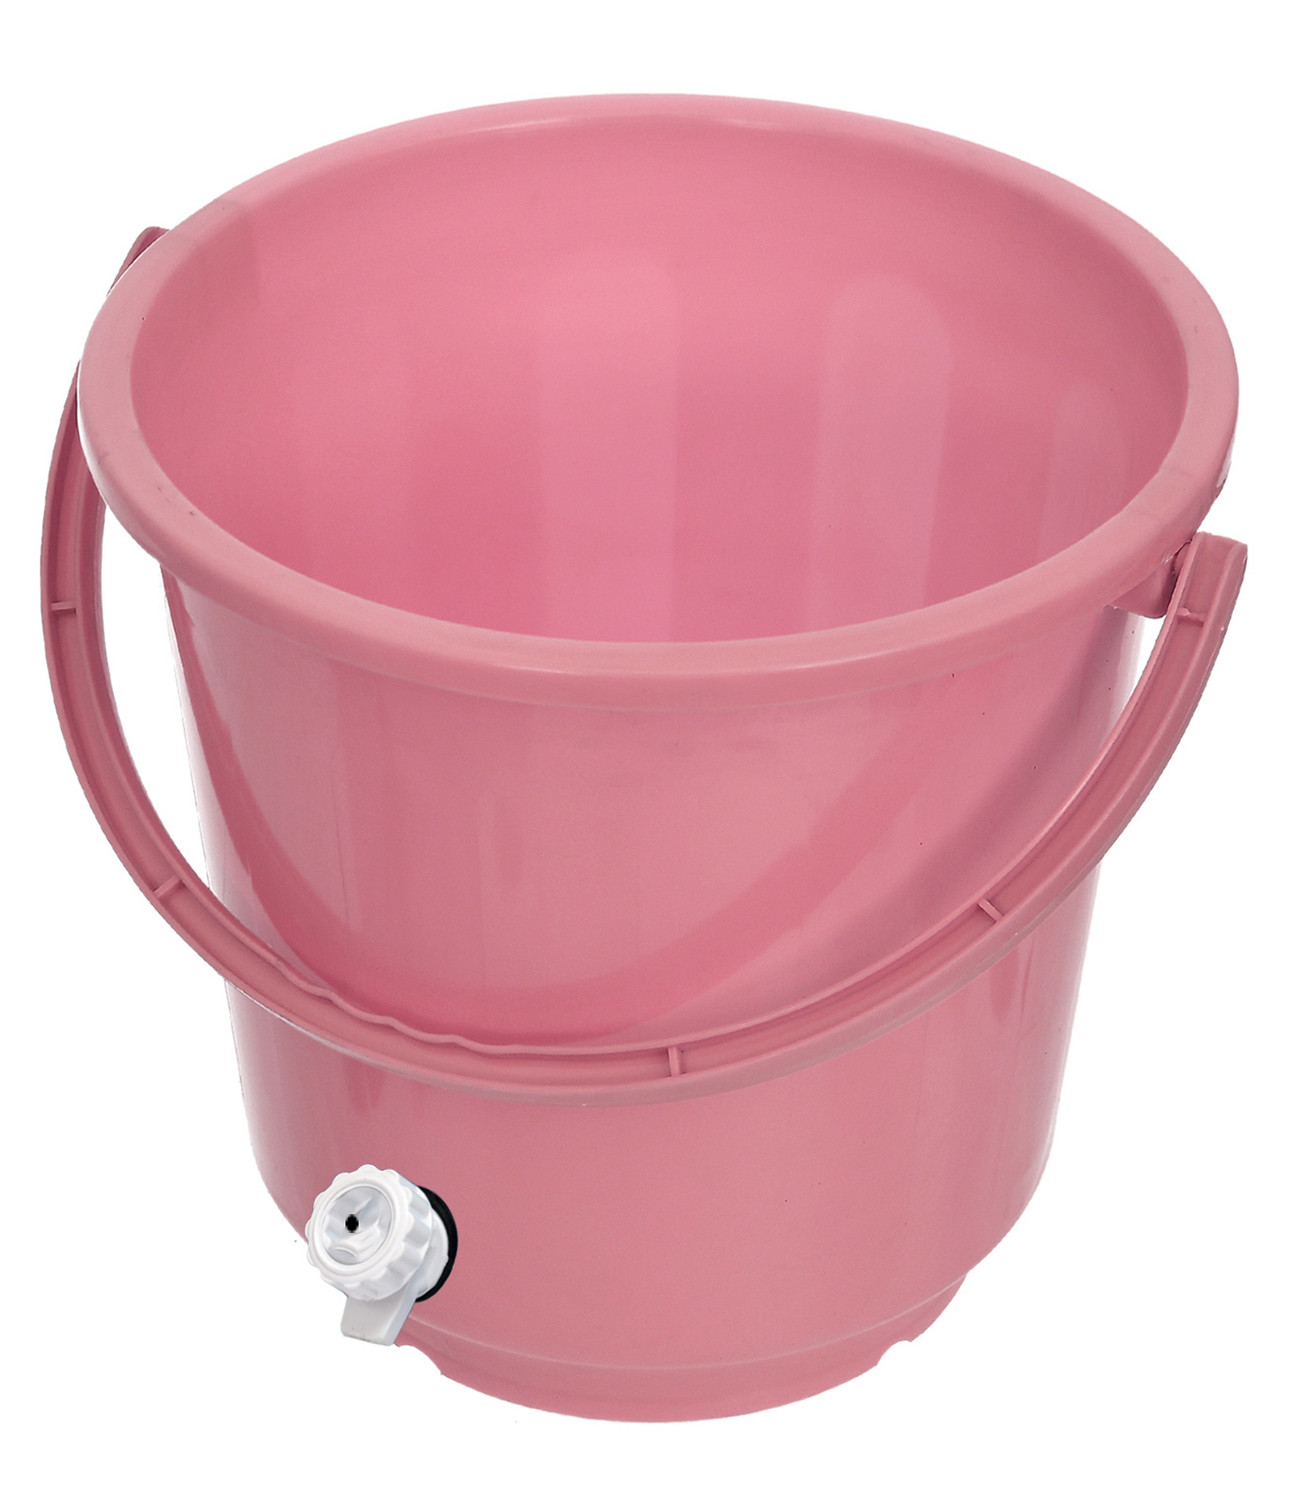 Kuber Industries Multipurposes Plastic Bucket With Lid & Tap System For Home Cleaning & Save Water, 18Ltr. (Pink)